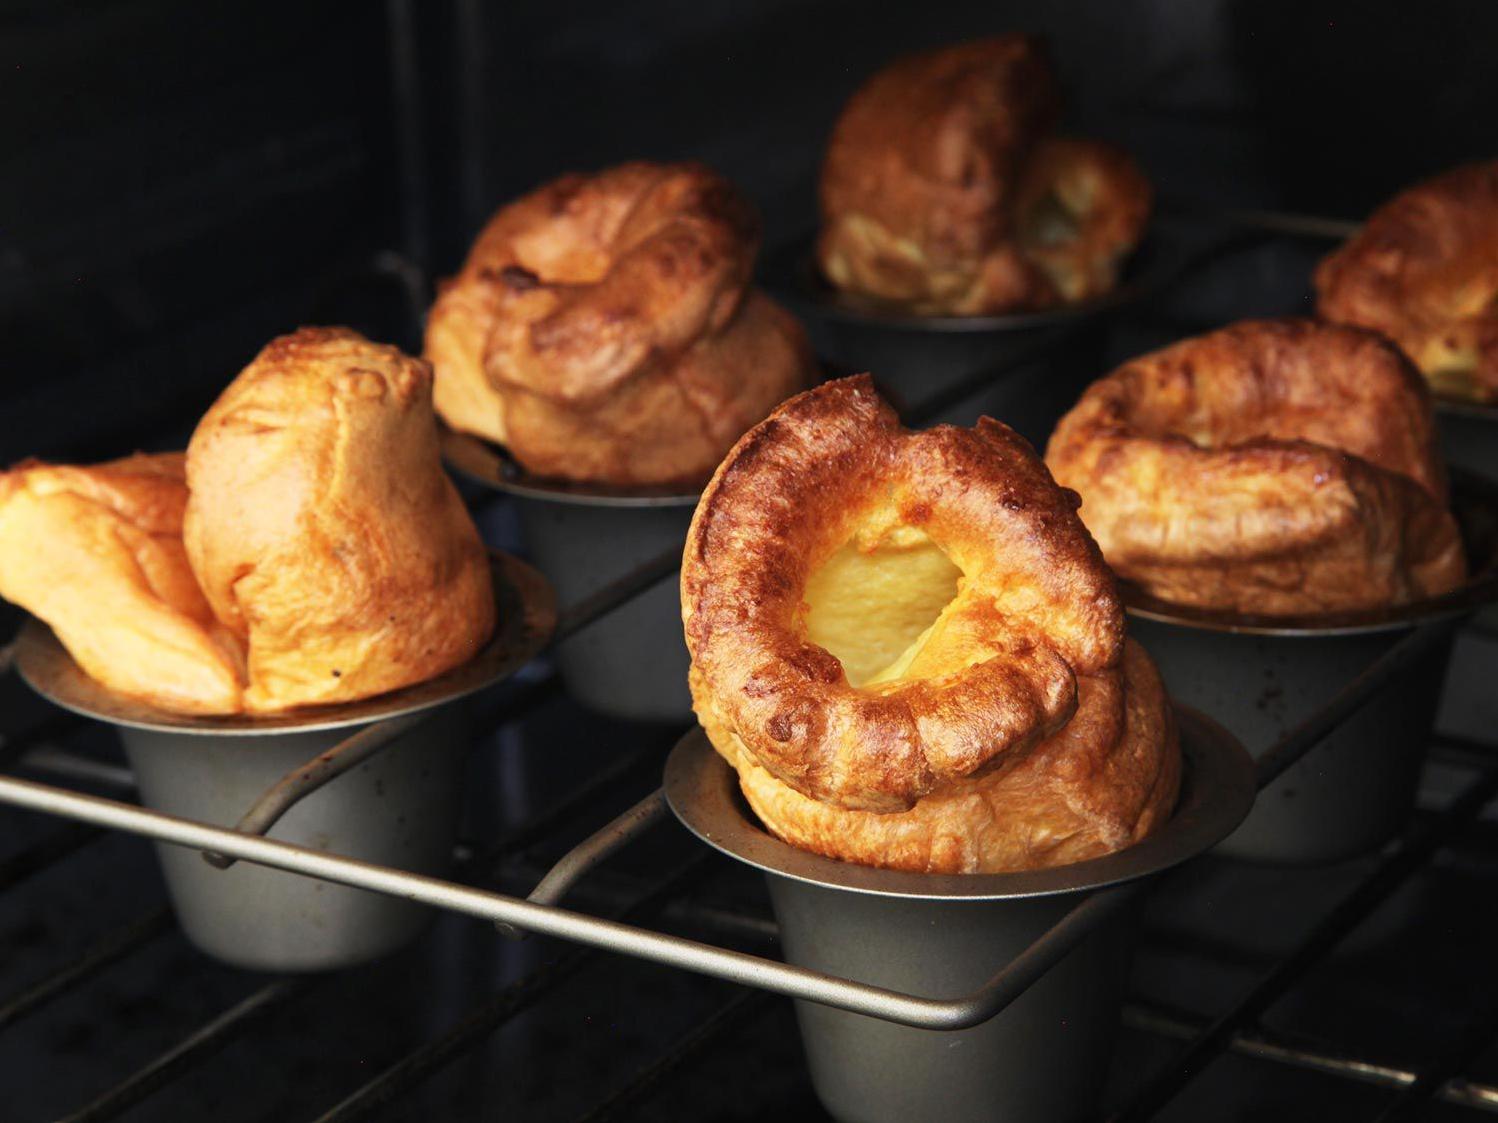  Golden and crispy on the outside, soft and airy on the inside- that's what Yorkshire puddings are all about!